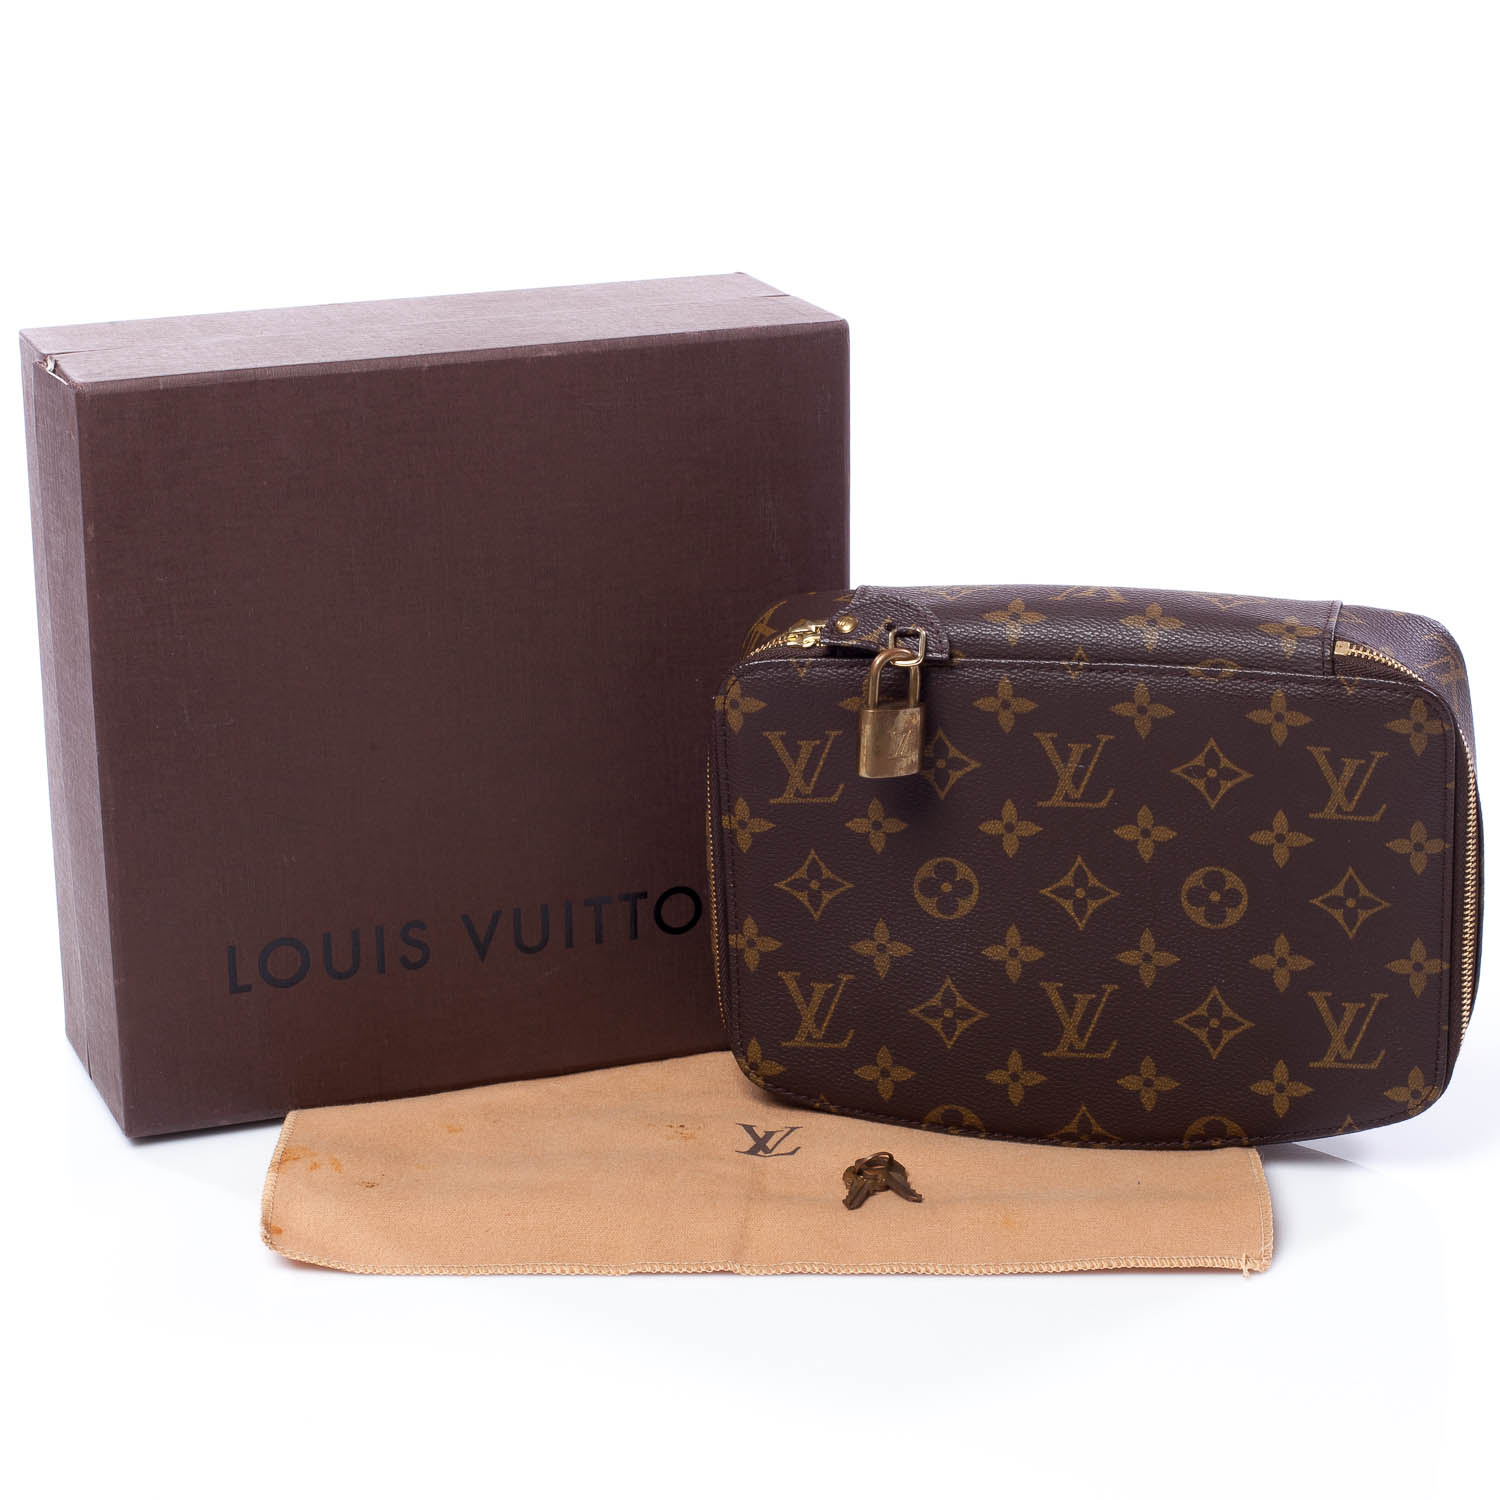 Louis Vuitton Monte Carlo - 21 For Sale on 1stDibs